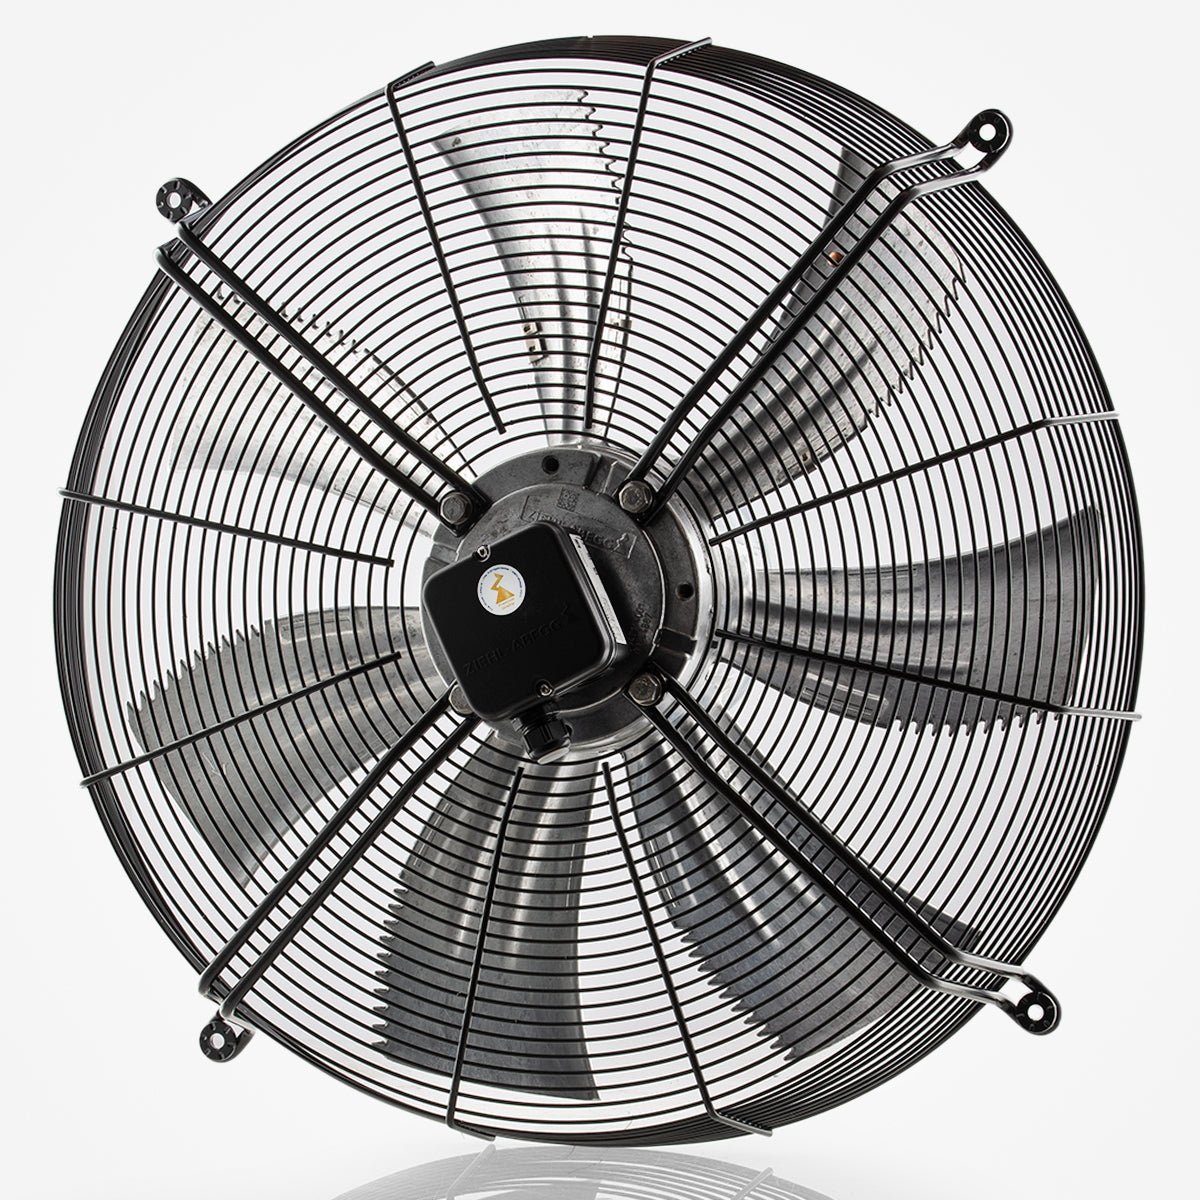 FN063-VDQ.6N.V7P6 ZIEHL-ABEGG Axial Fan - FN063-VDK.6N.V7P6 Without install  plate